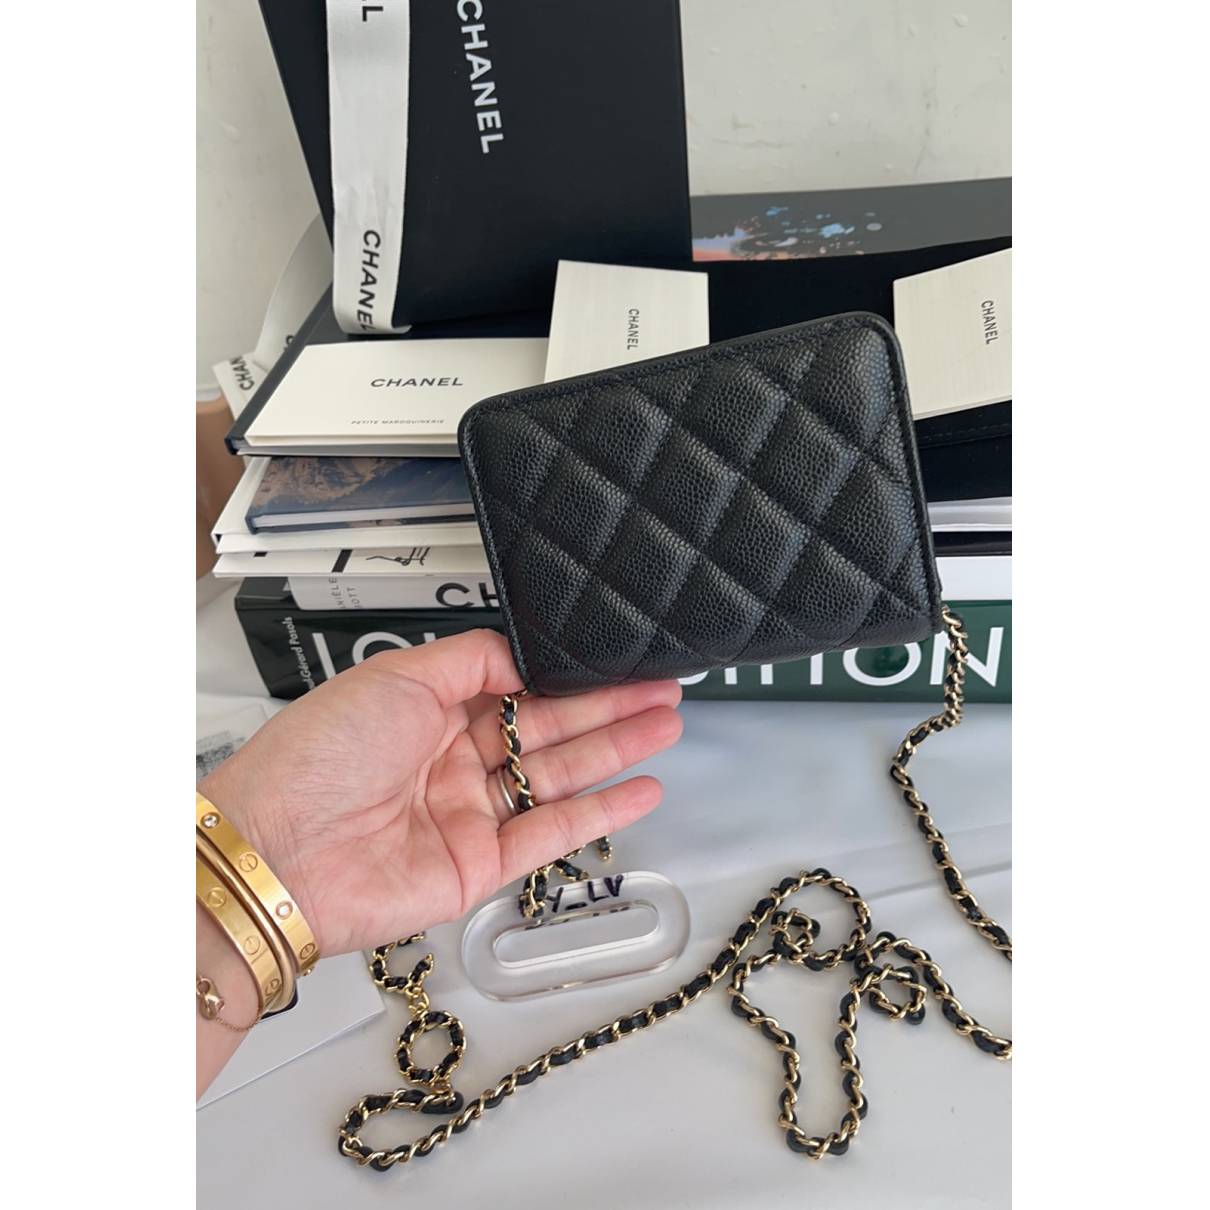 Chanel - Authenticated Wallet on Chain Timeless/Classique Handbag - Leather Black for Women, Never Worn